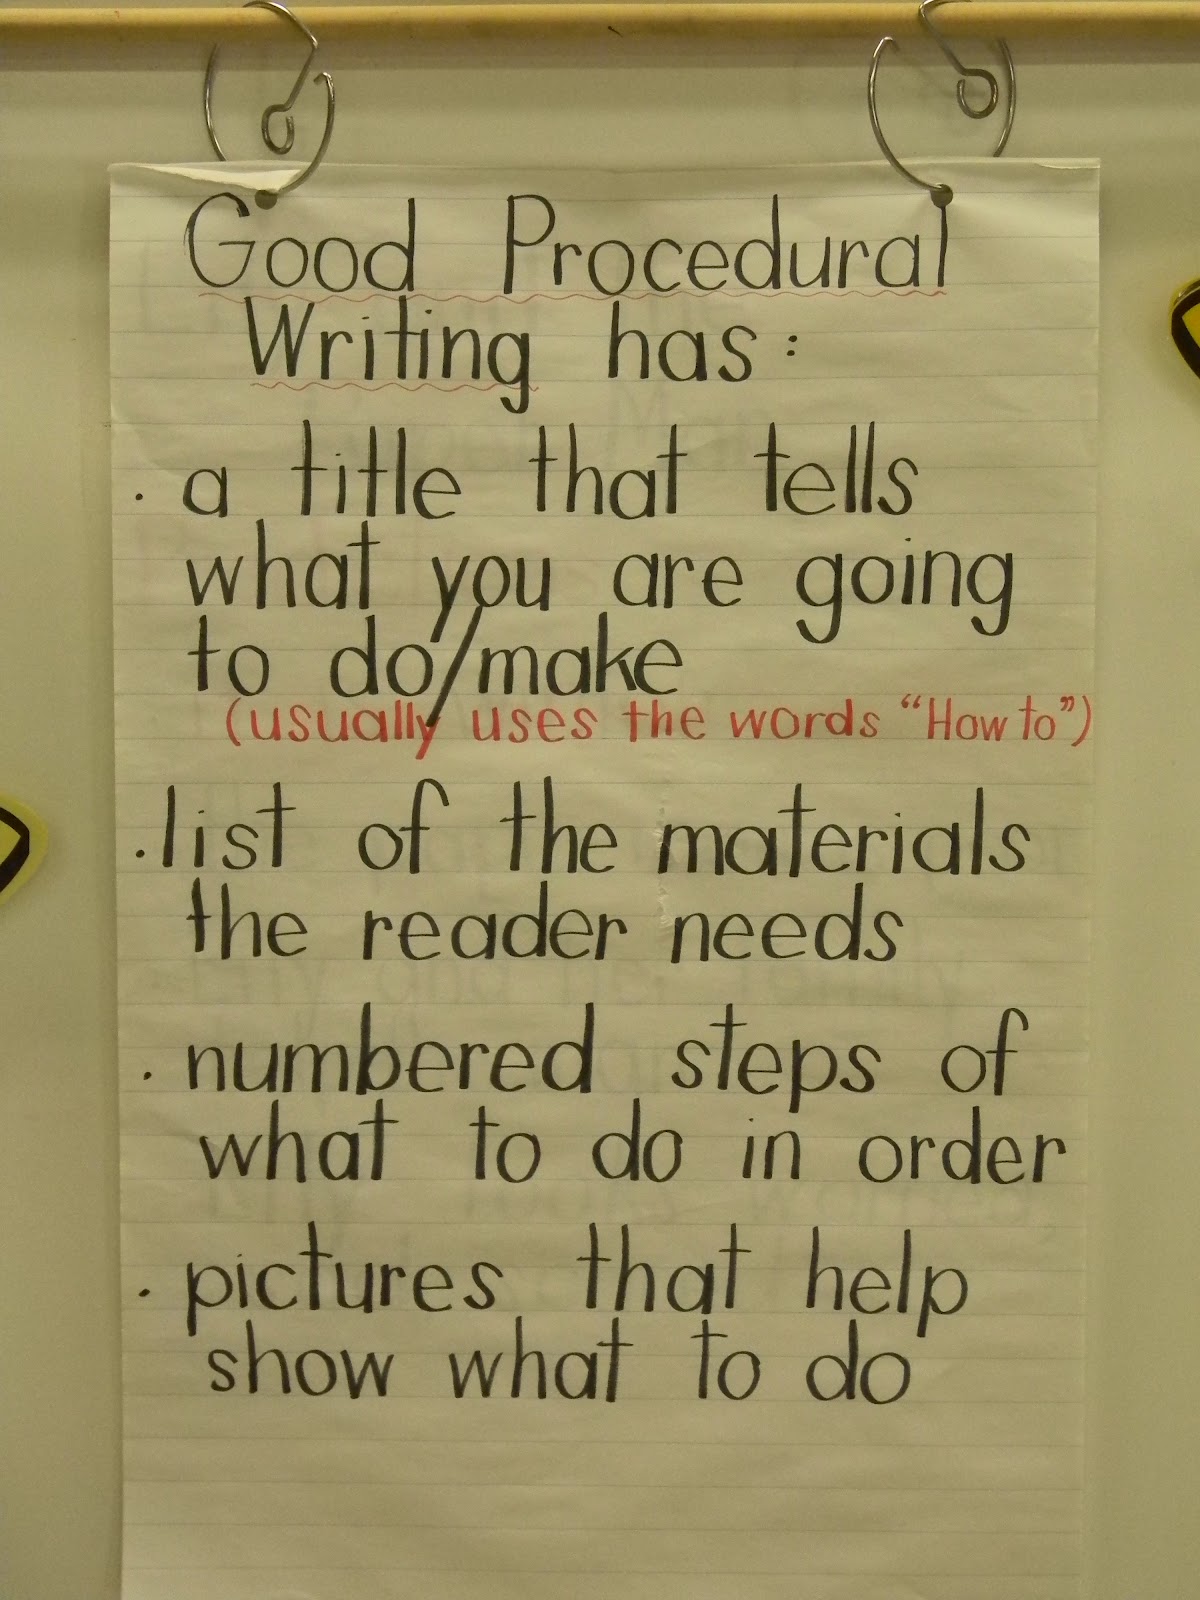 ms-sinclair-s-grade-one-two-procedural-instructional-writing